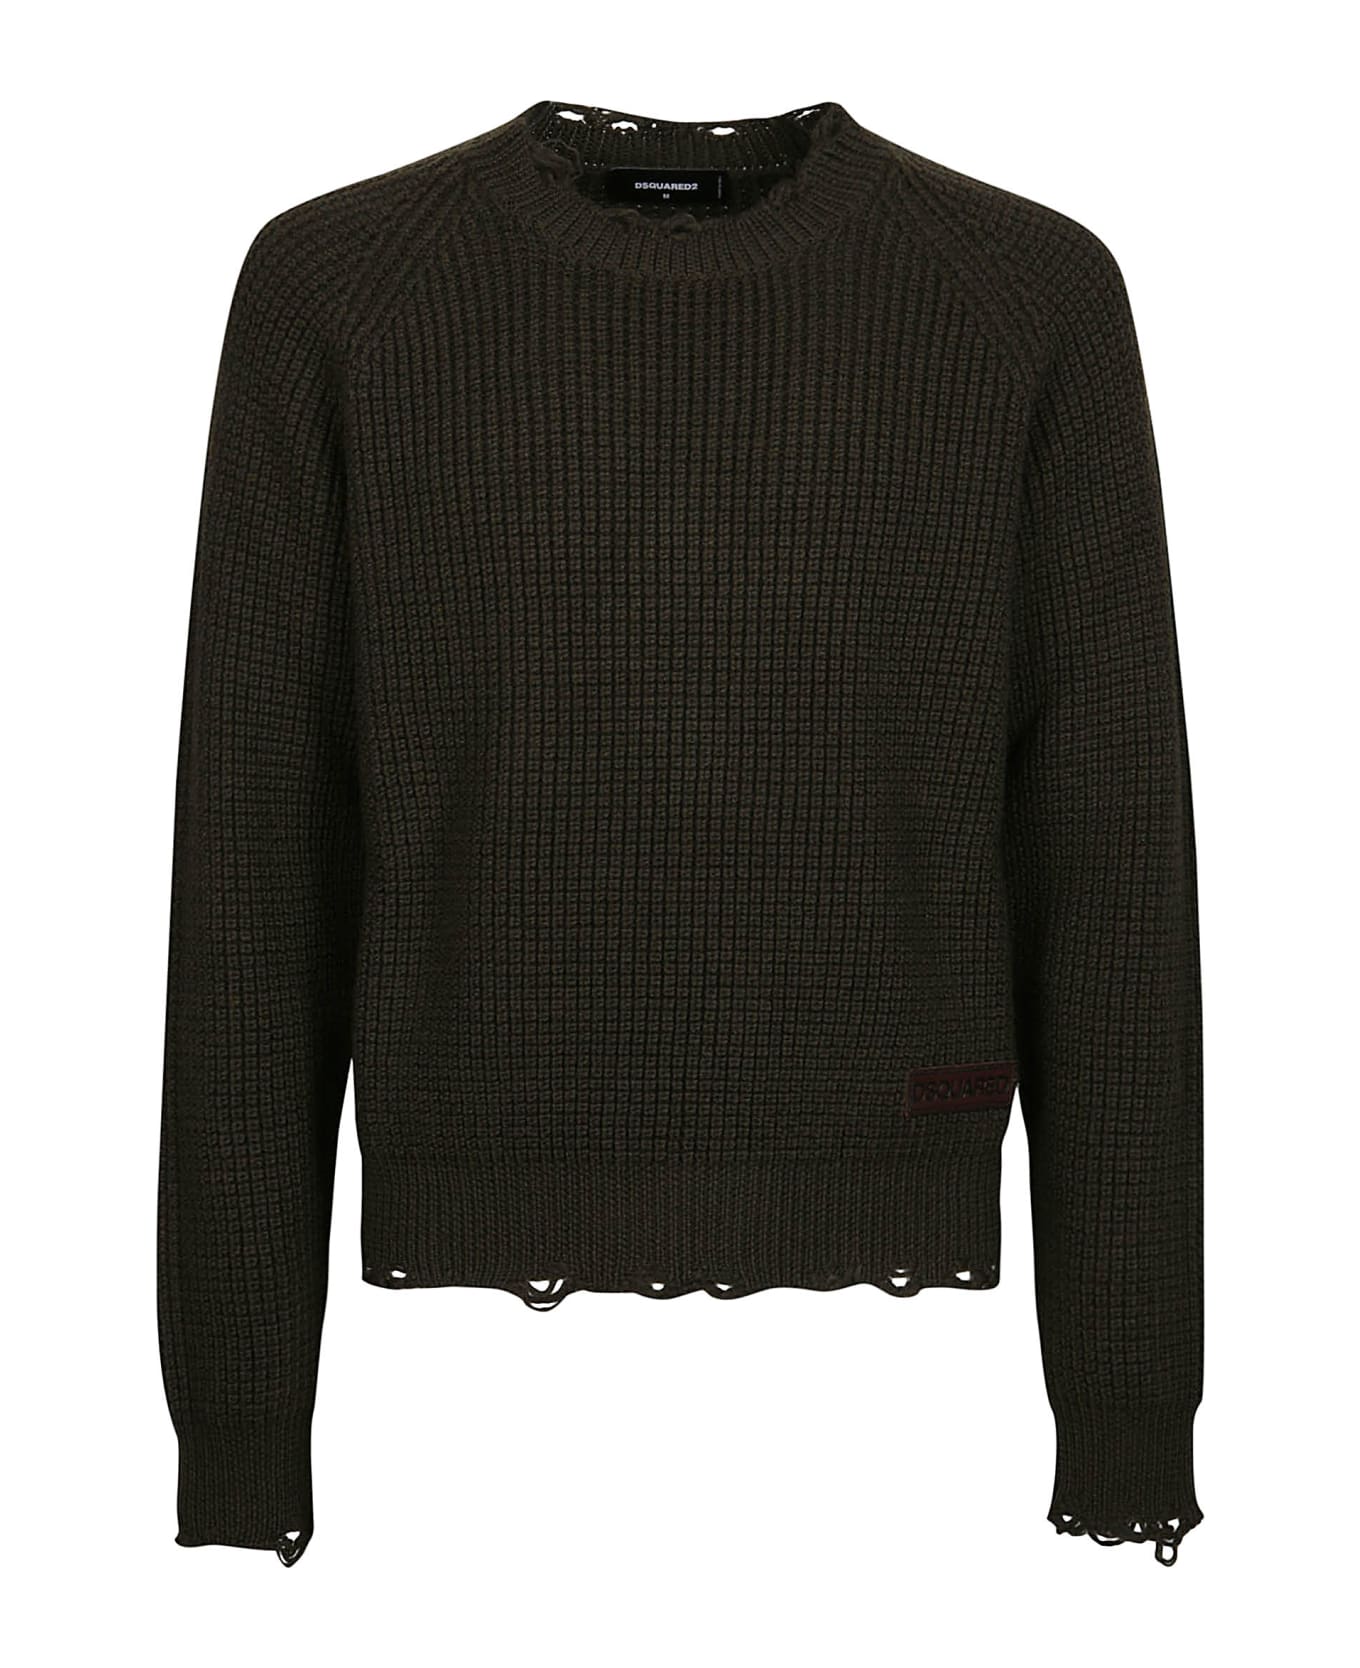 Dsquared2 Sweater - Deep Forest